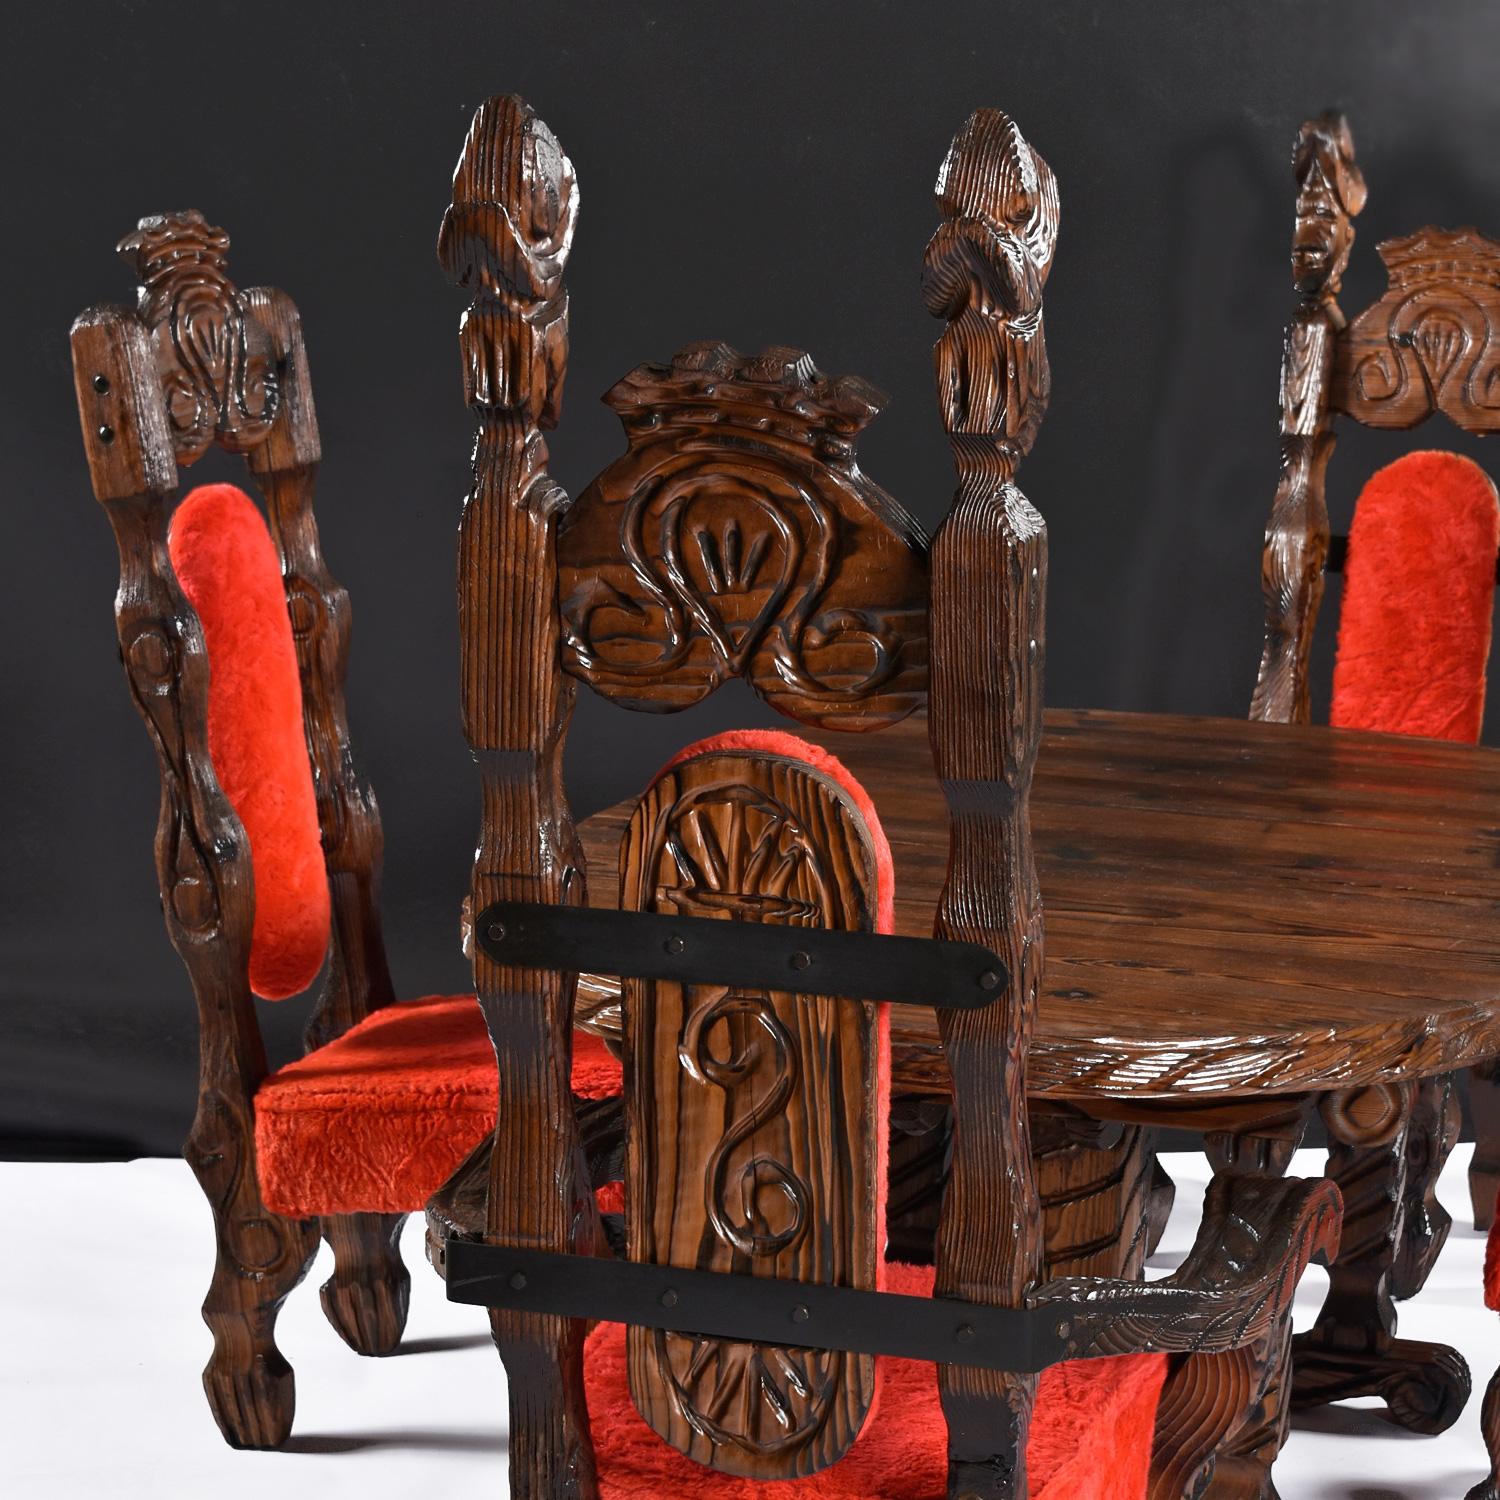 Fabulous complete Witco Tiki dining set with four red velvet chairs and expanding dining table. This is the first time in 13 years of business that we’ve had this complete Witco dining set. We’re lucky to find this elusive set in outstanding